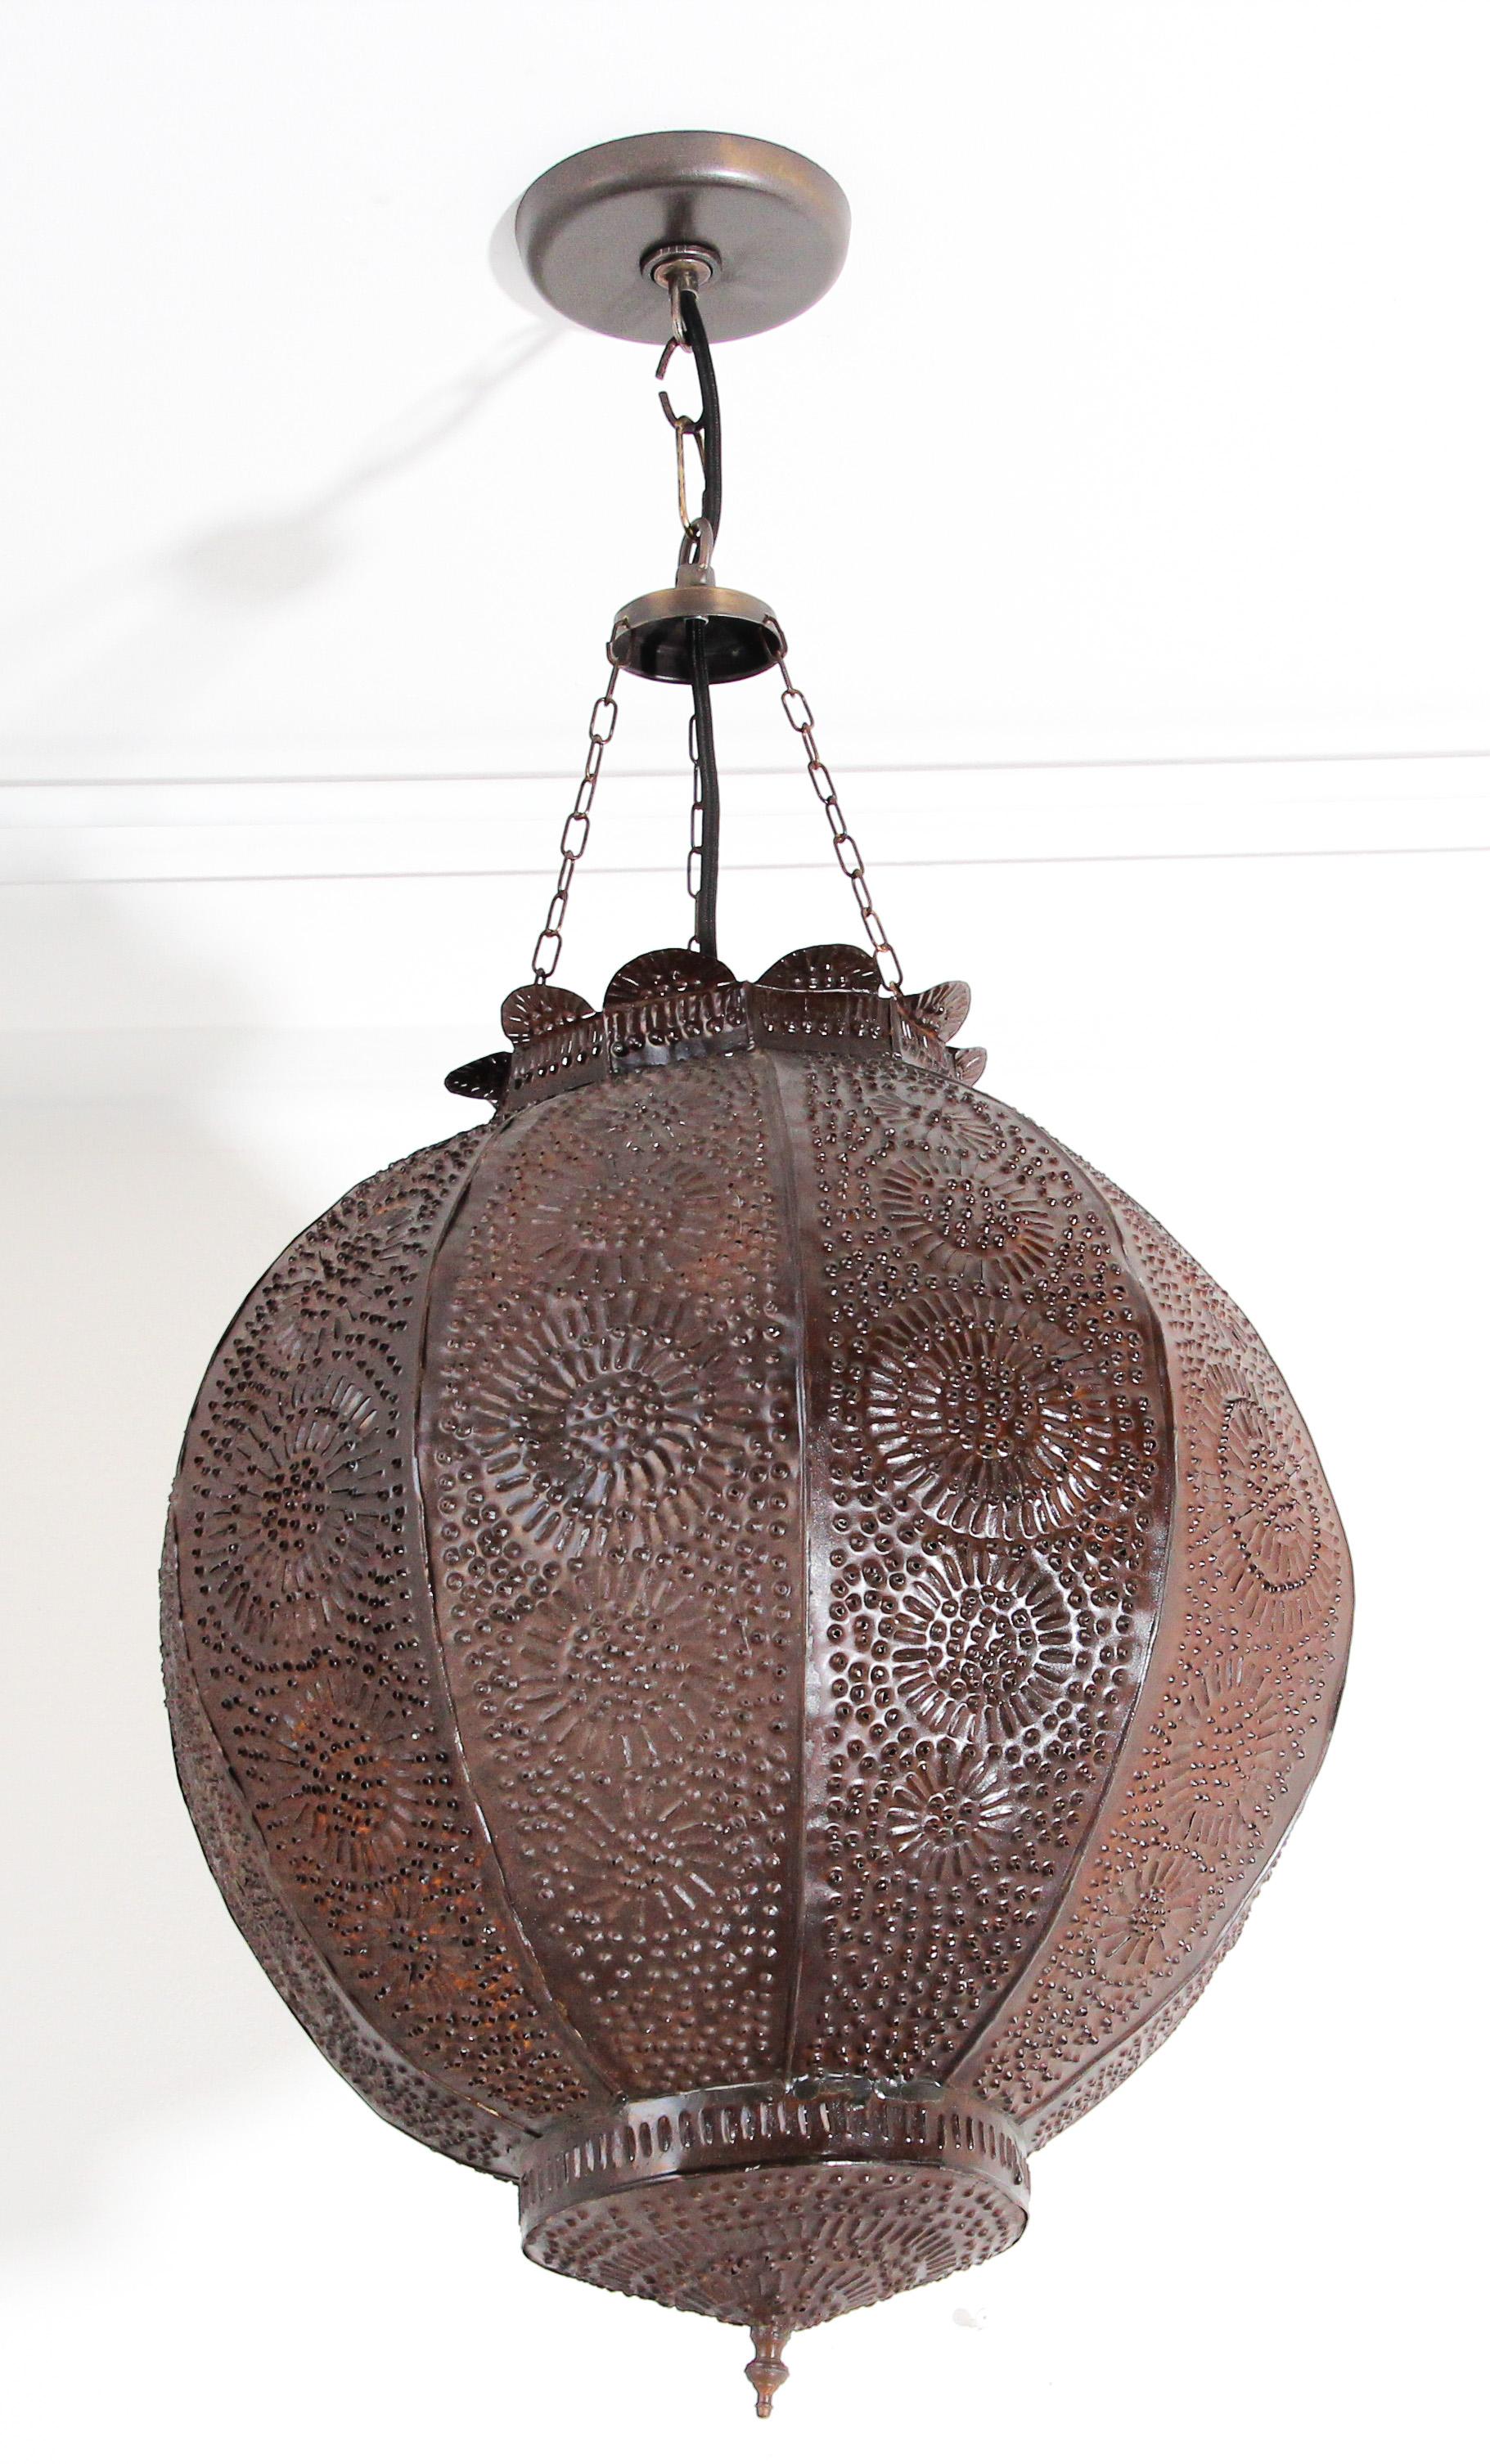 Metal orb pendant handcrafted by skilled artisans in Morocco, North Africa.
Amazing metal Moroccan lantern hand-pierced with thousands of small holes to diffuse the light through.
Pomegranate shape adorned with Moorish design.
Handmade of light tin